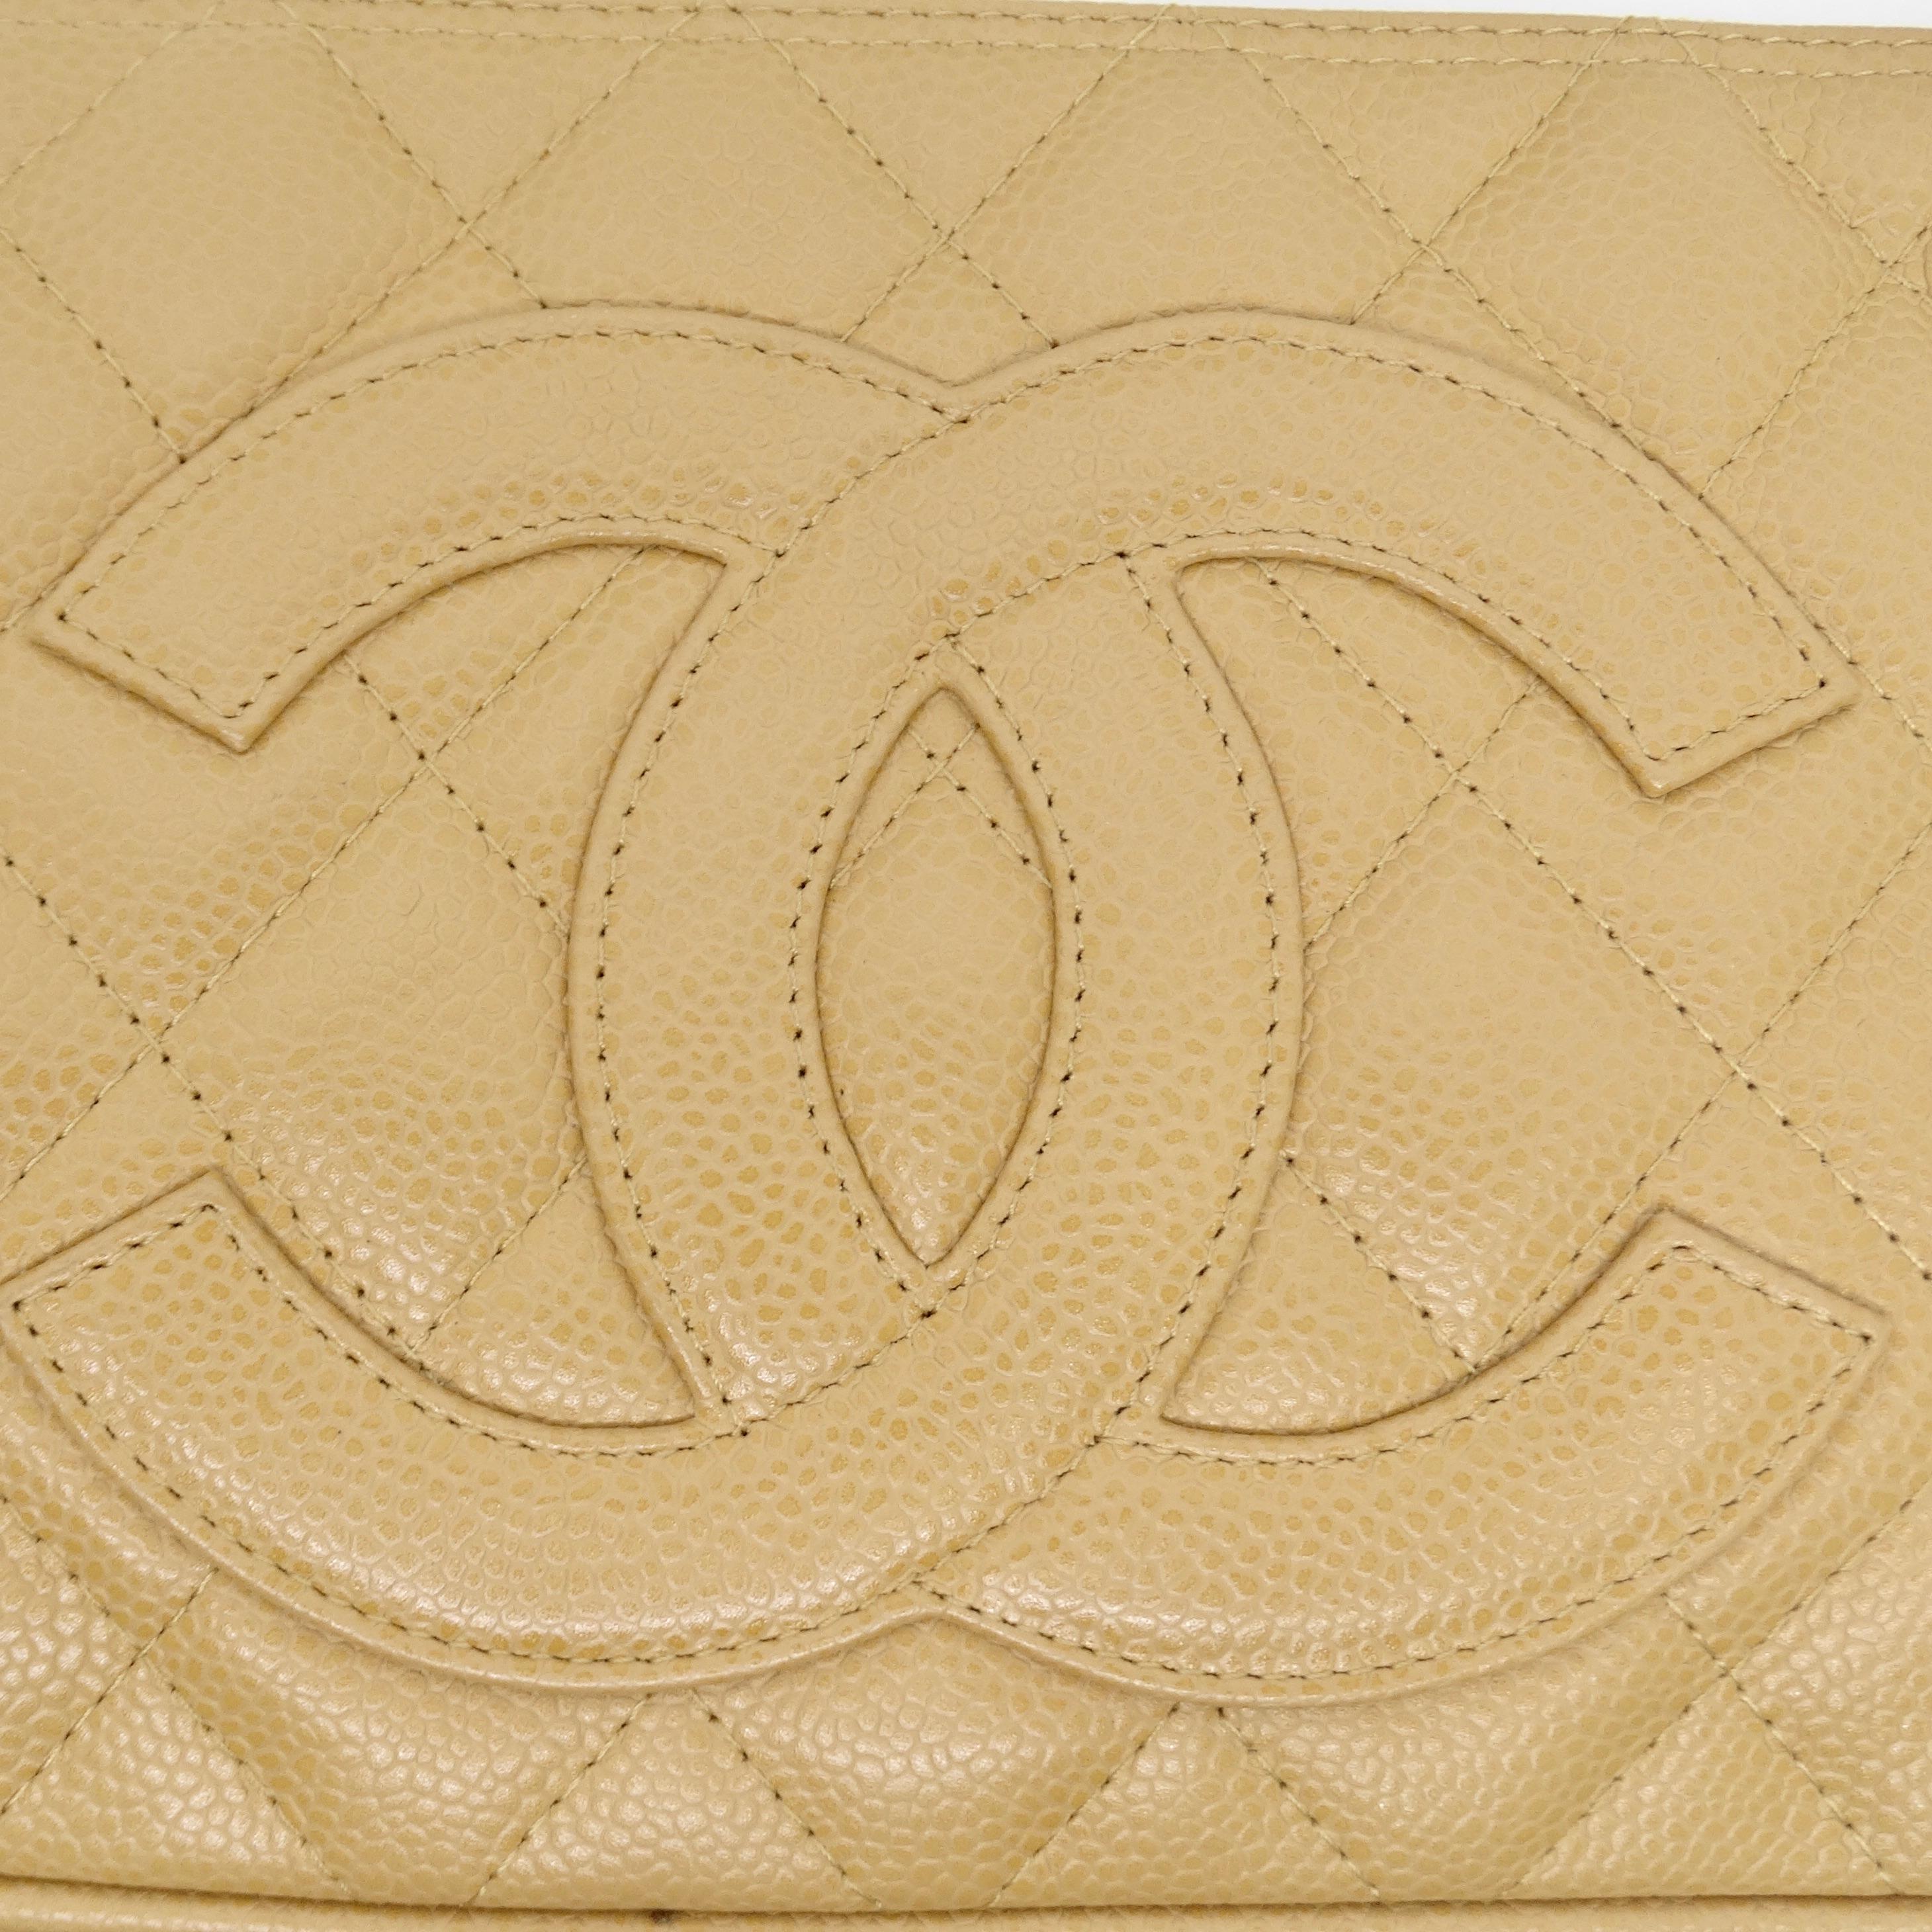 Introducing the Chanel Timeless CC Shoulder Bag – an epitome of elegance and sophistication. Crafted from beige quilted leather, this shoulder bag is adorned with the iconic and unmistakable Chanel interlocking 'C' logo prominently displayed on the